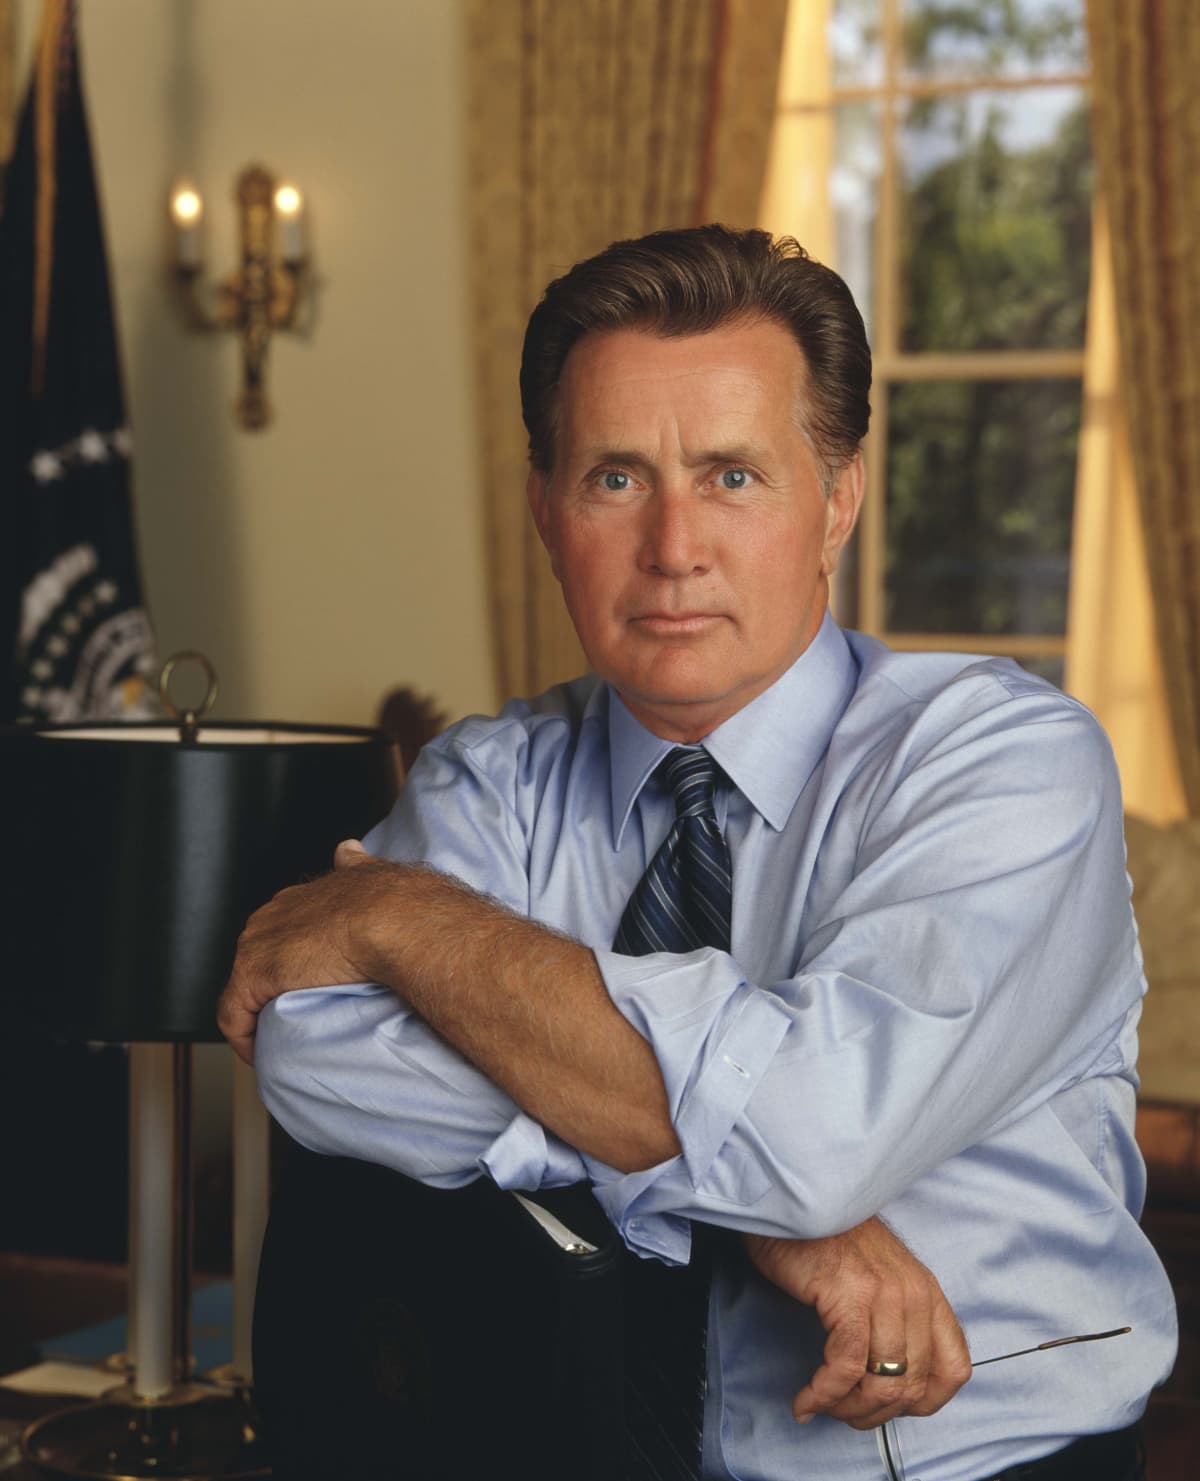 382936 06: Actor Martin Sheen stars as President Josiah Bartlet on NBC''s West Wing which airs Wednesdays on NBC (9-10 p.m. ET). (Photo David Rose/NBC/Newsmakers)